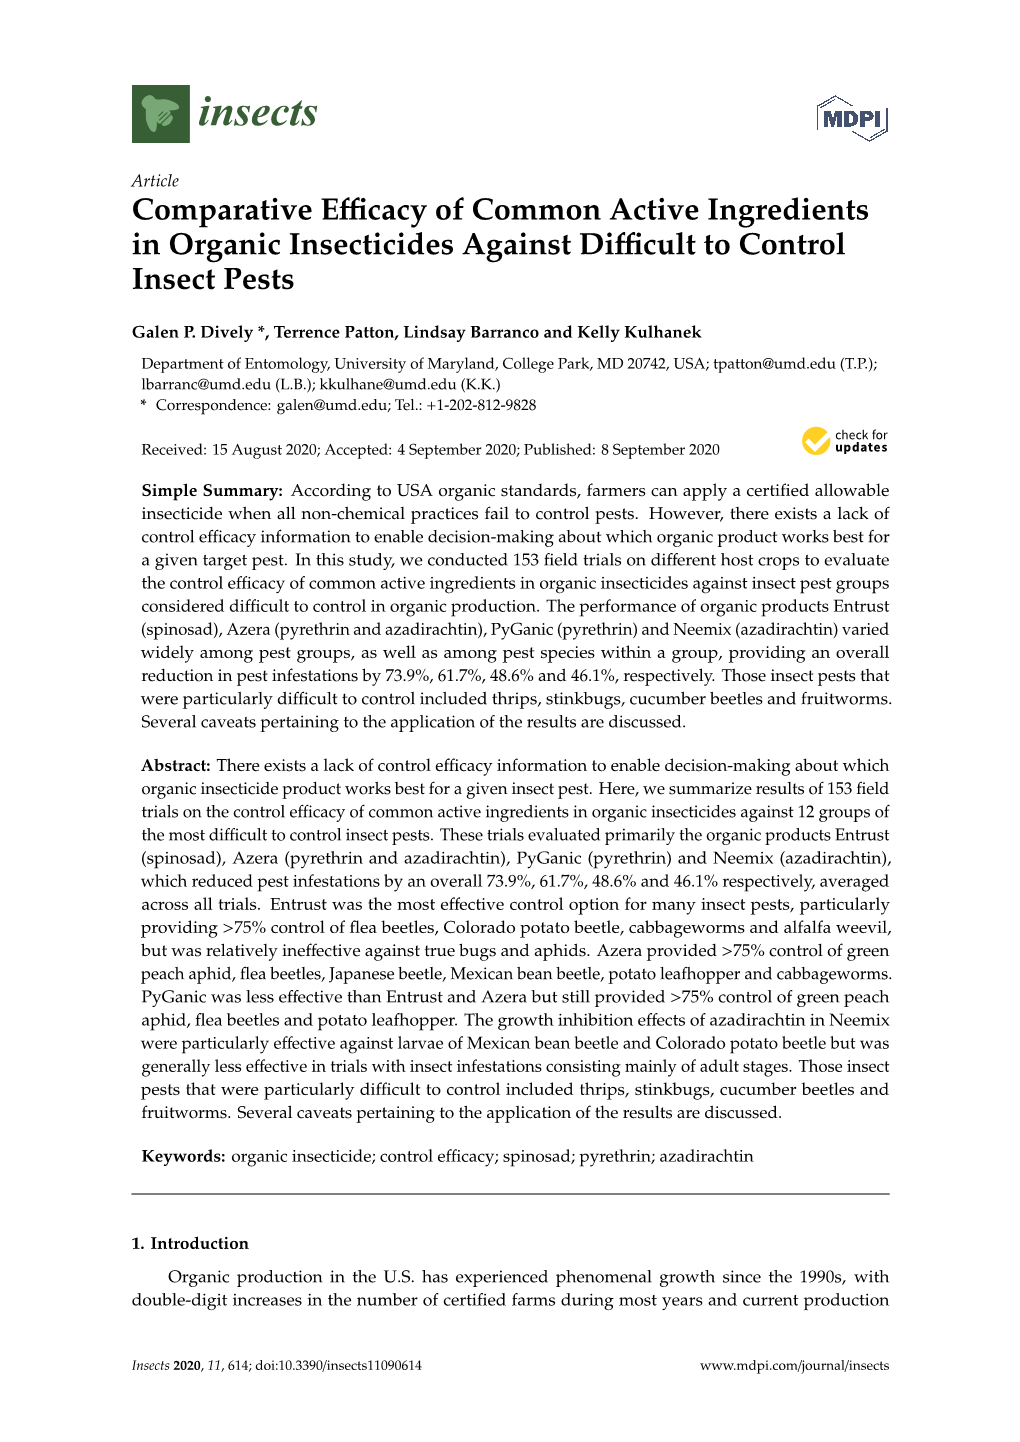 Comparative Efficacy of Common Active Ingredients in Organic Insecticides Against Difficult to Control Insect Pests